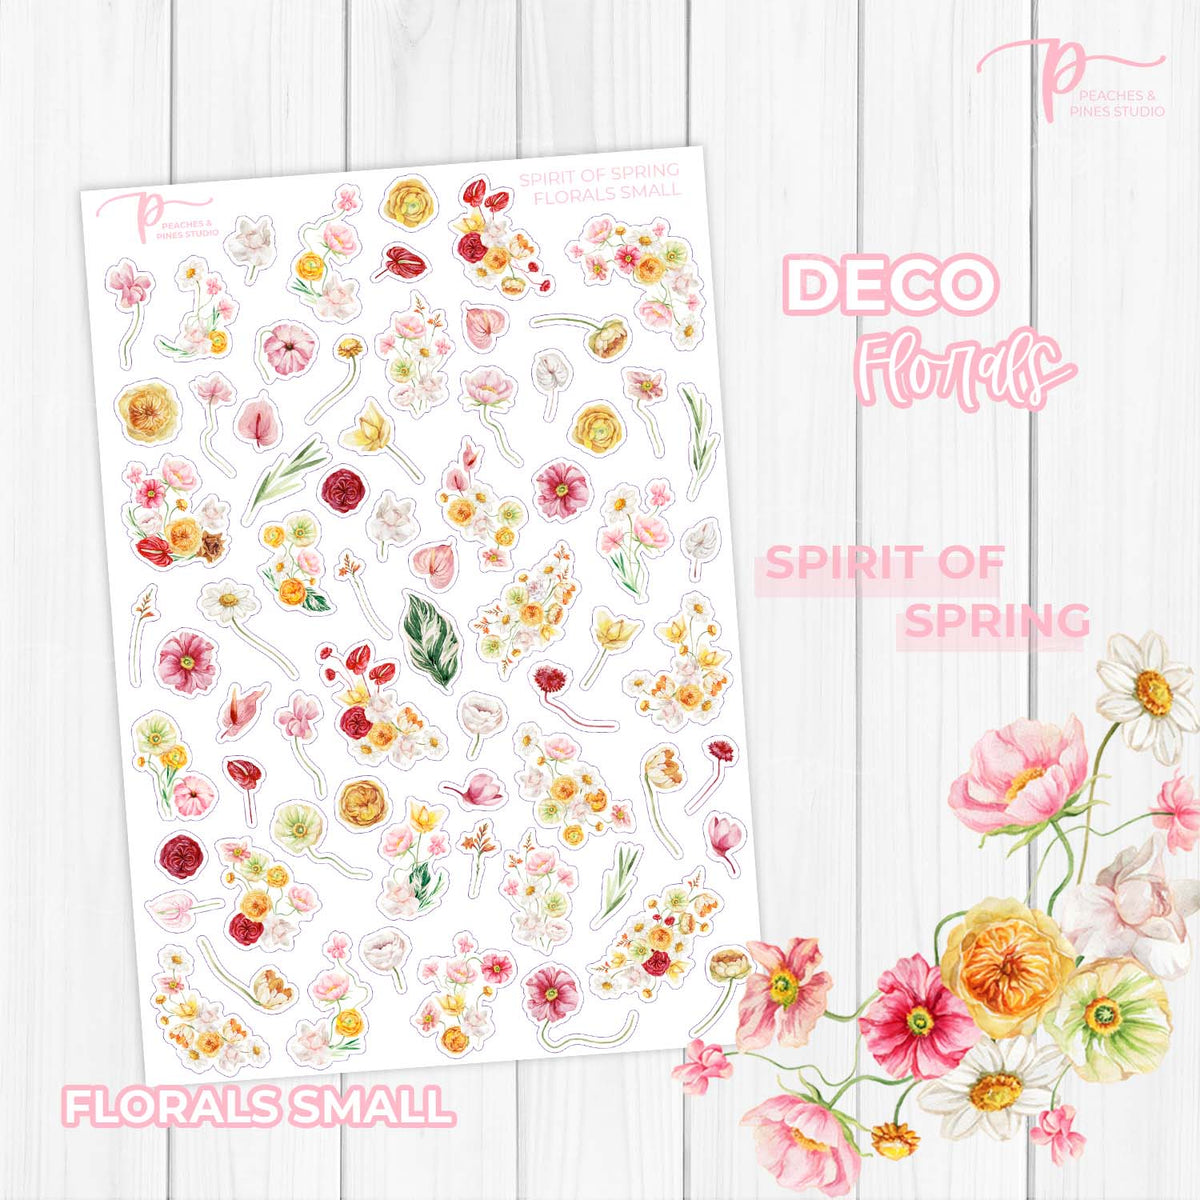 Spirit of Spring - Florals Small